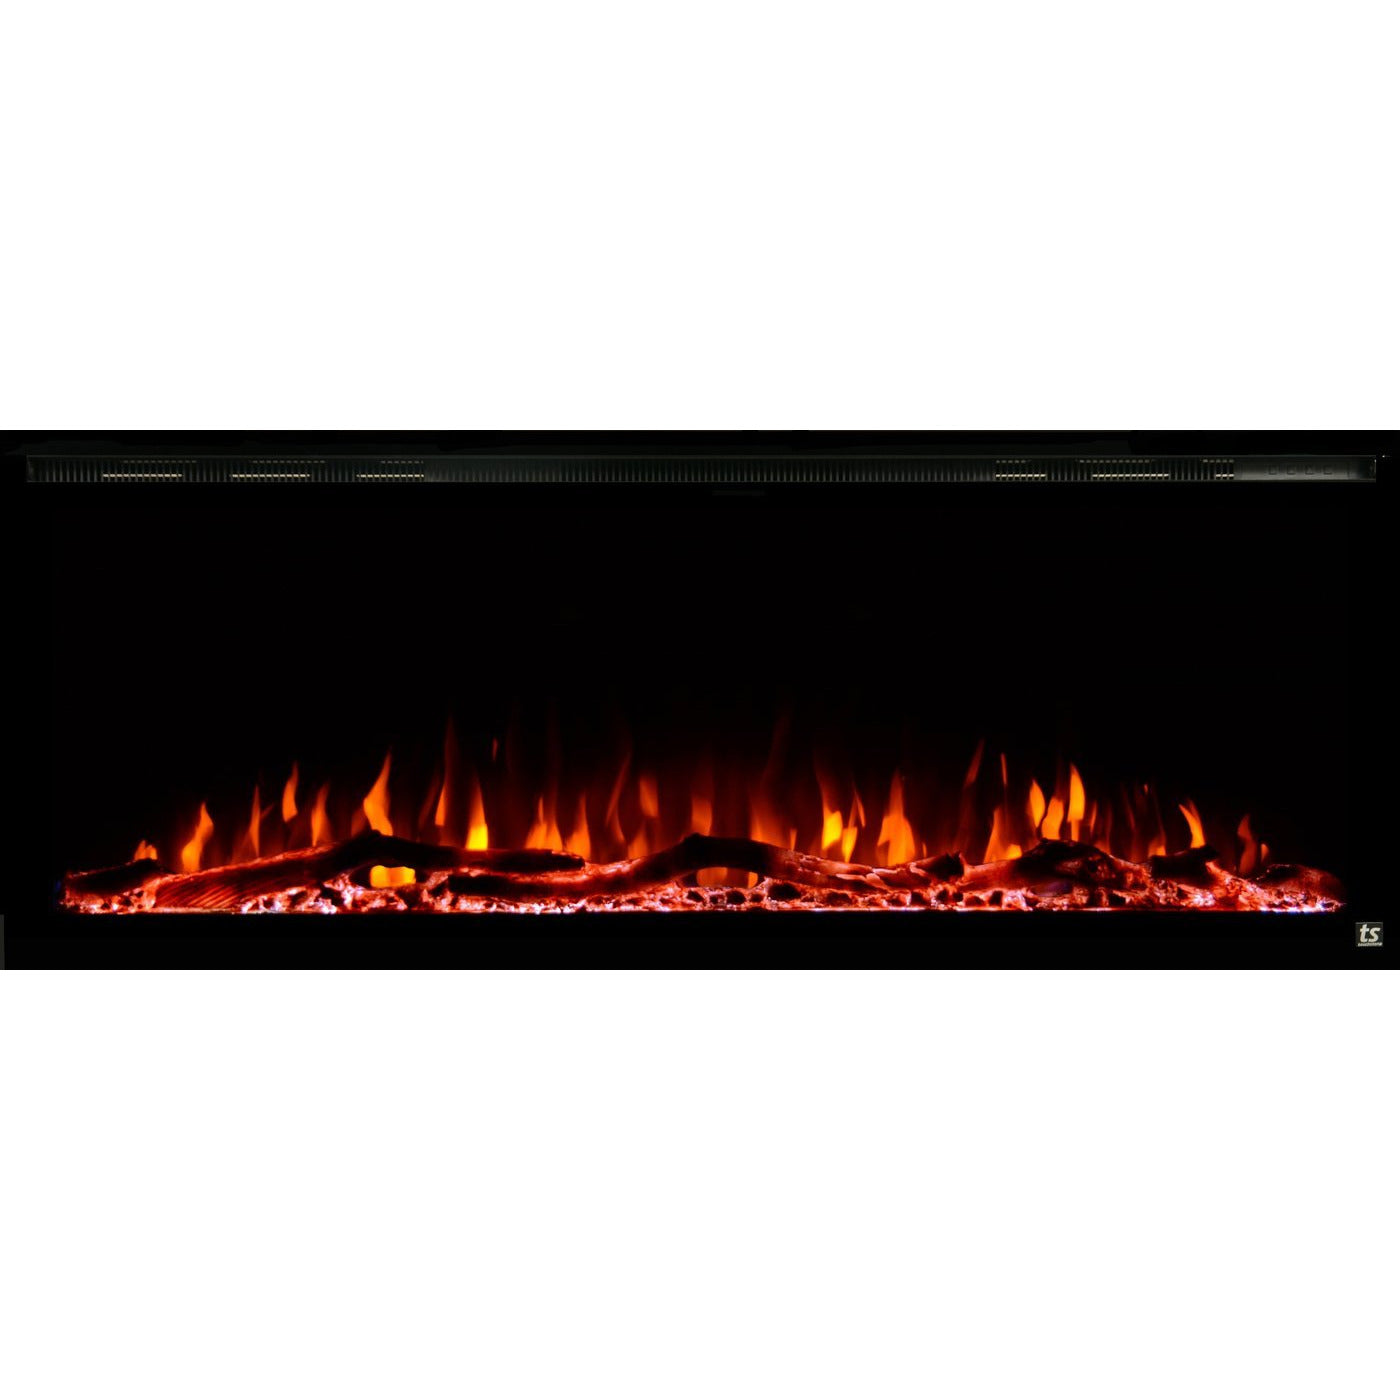 Black Touchstone Sideline Elite Recessed Electric Fireplace in combination of orange, red, yellow flame with orange crystals.